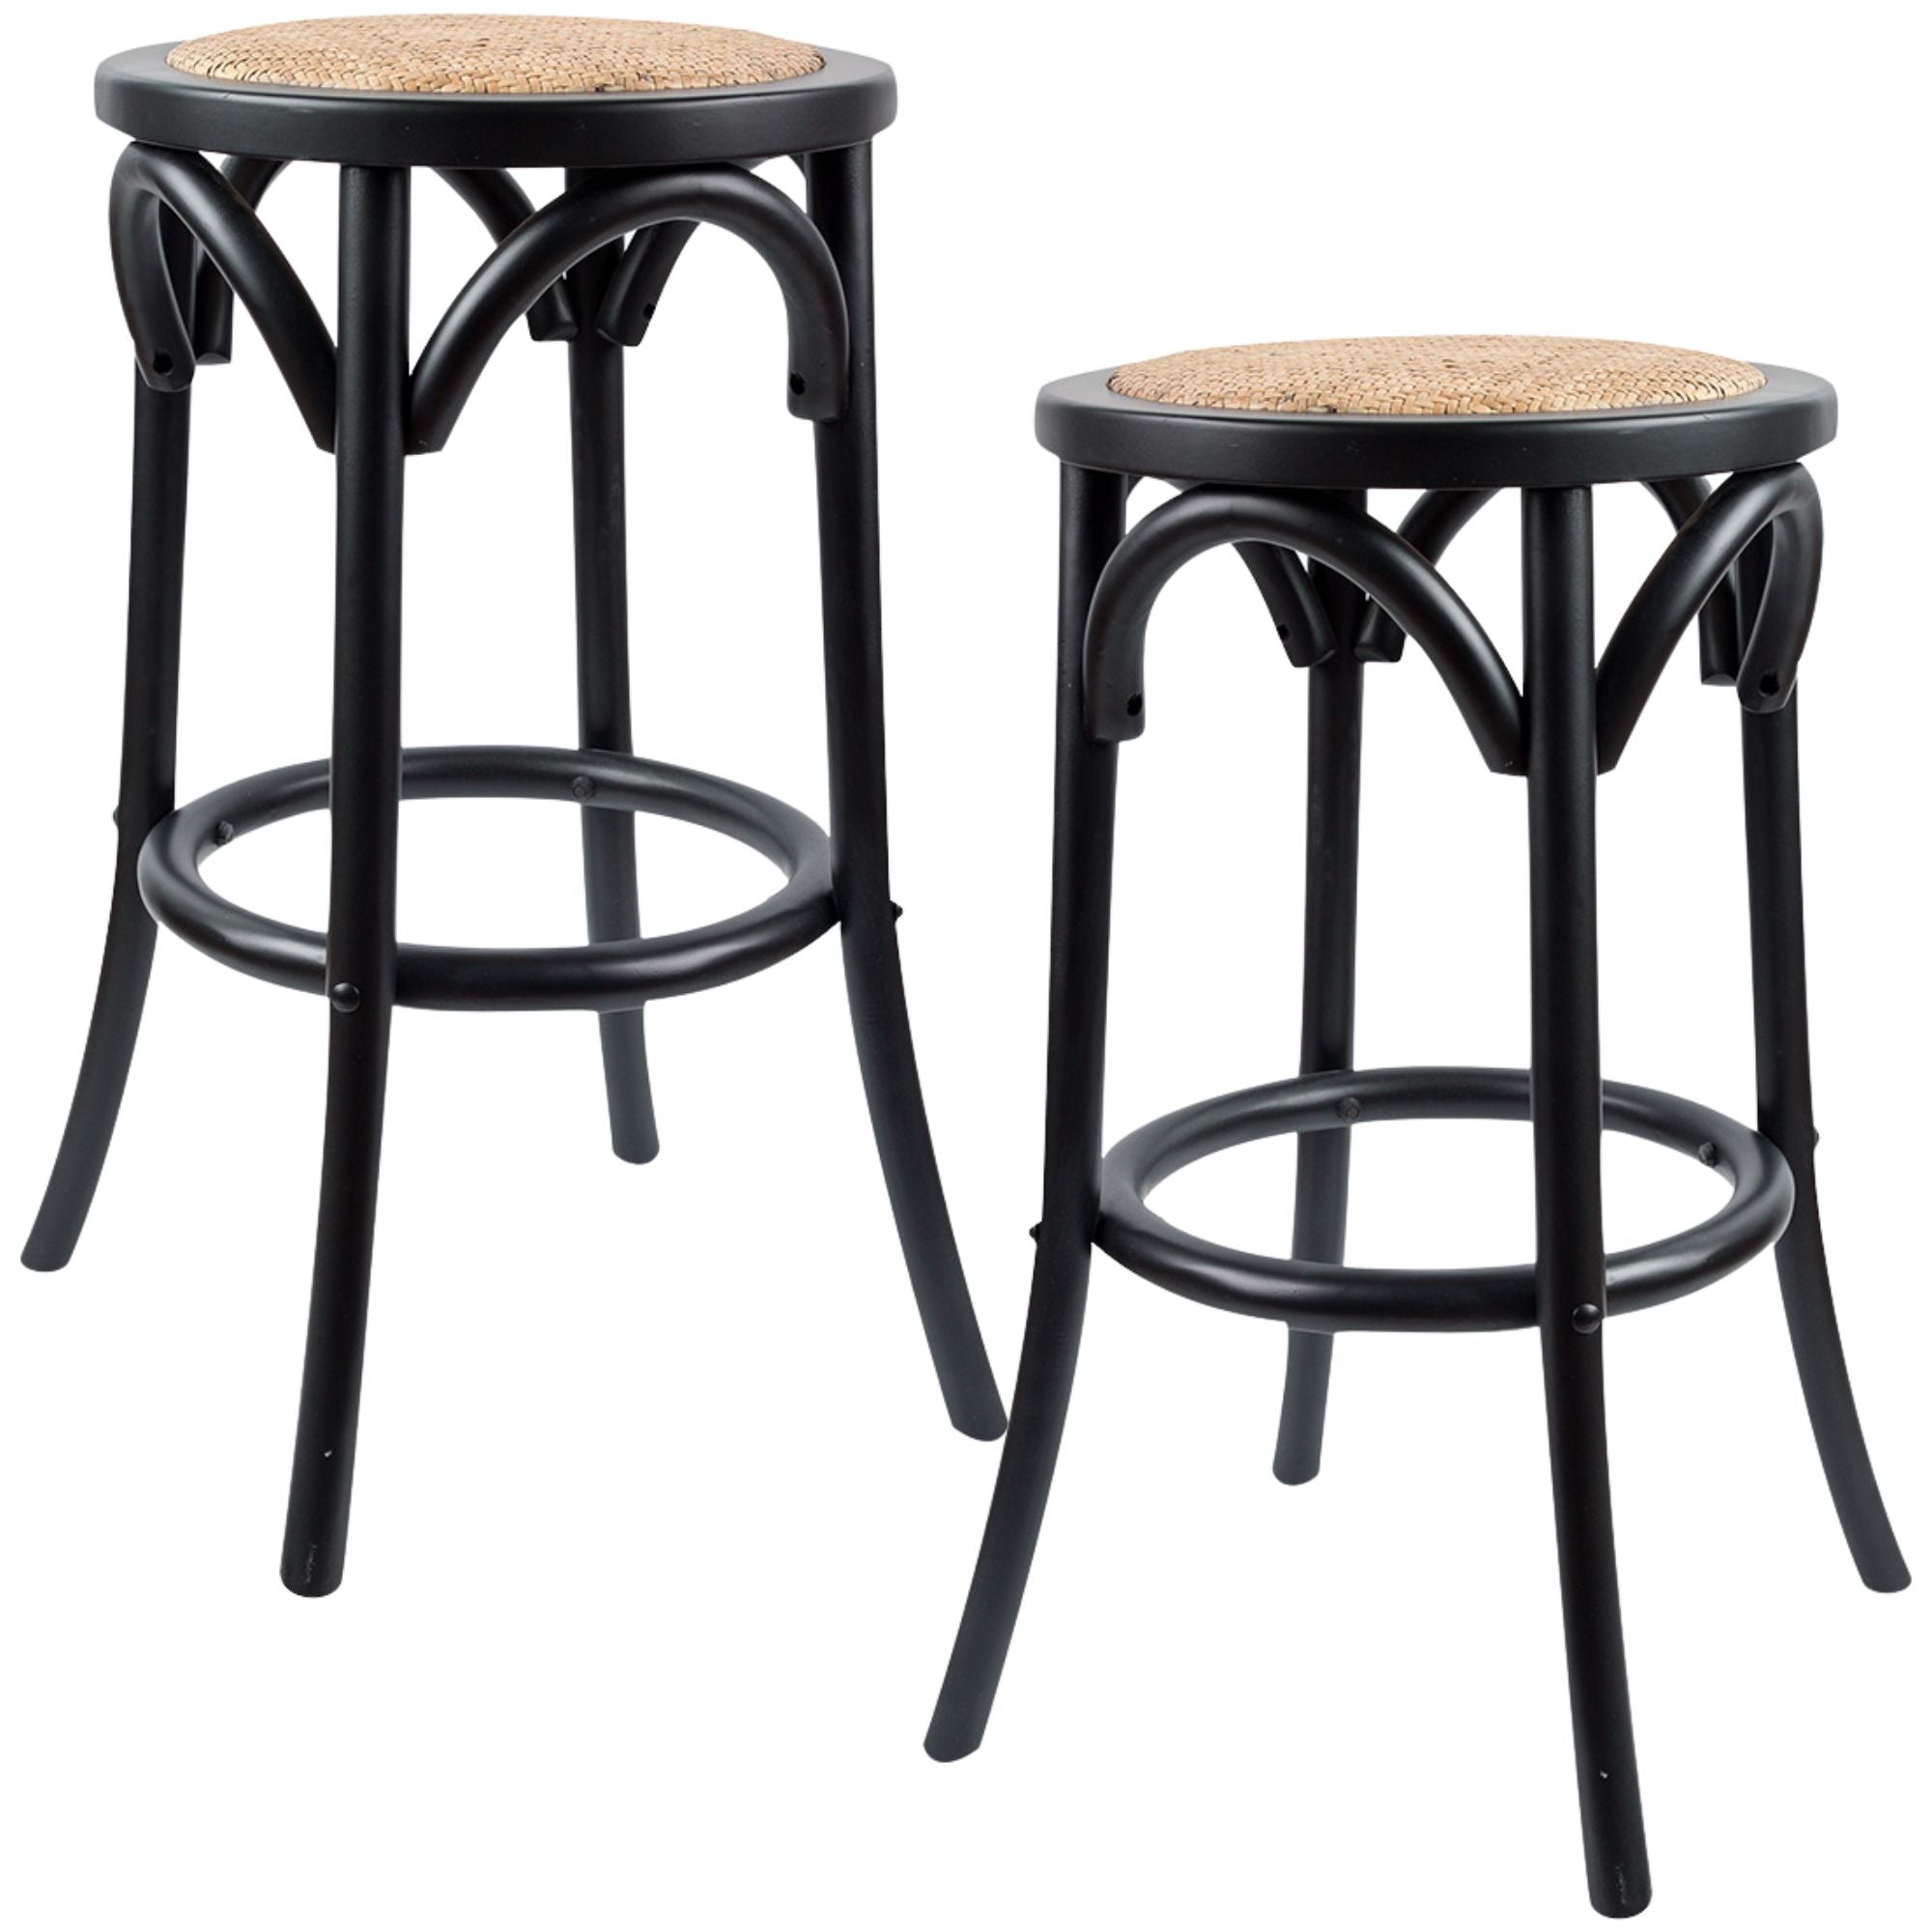 Aster 2pc Round Bar Stools Dining Stool Chair Solid Birch Wood Rattan Seat Black - ozily